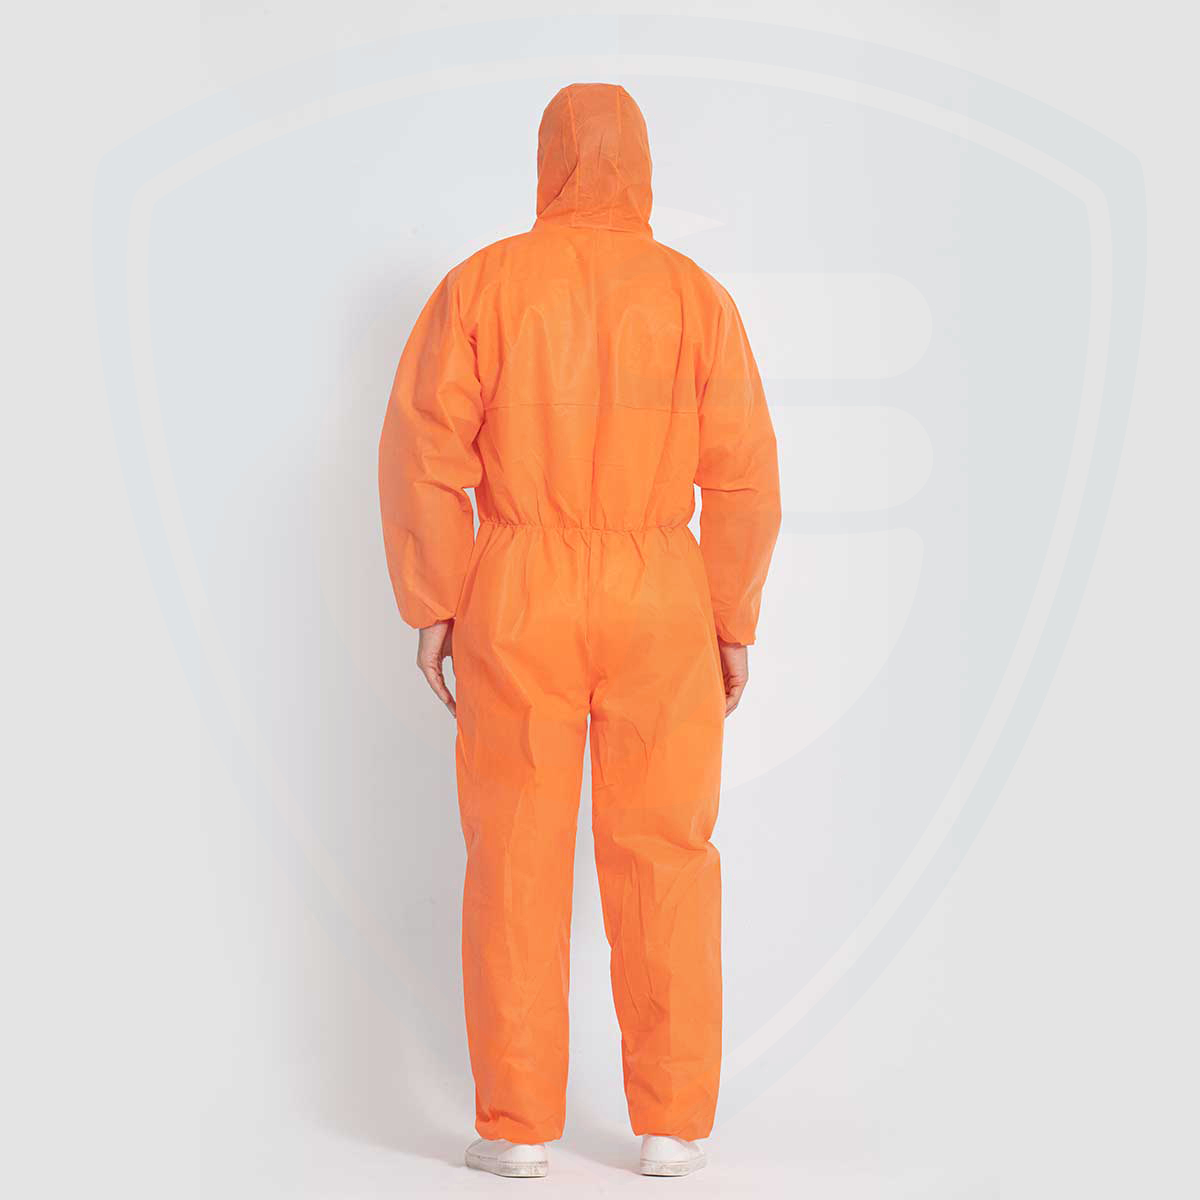 SMS Overall Polypropylene Nonwoven Anti-static Disposable Protective Coverall Workwear